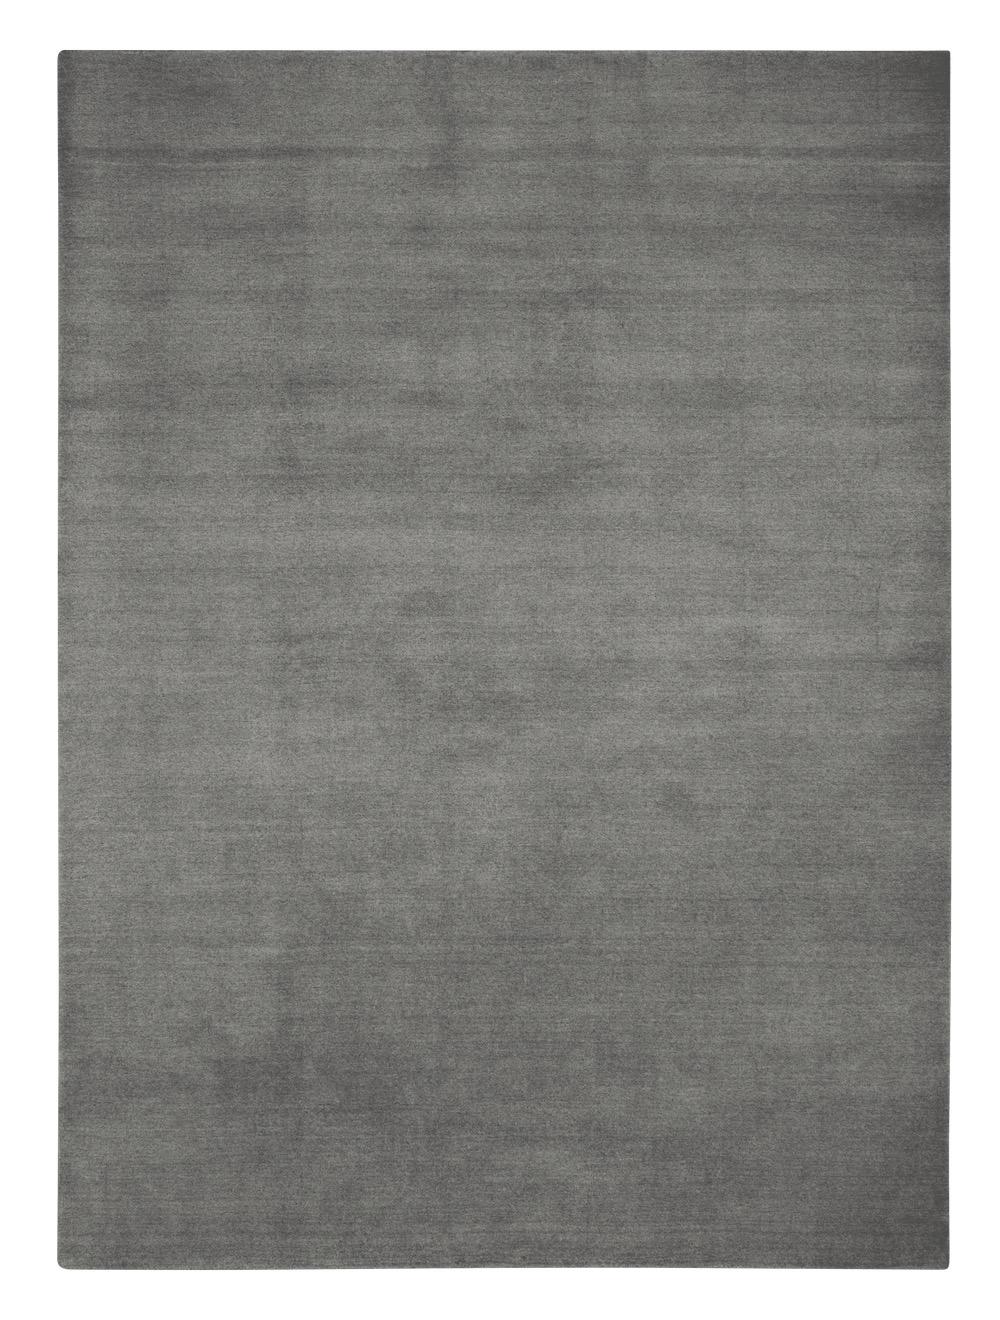 Light grey Earth Natural Carpet by Massimo Copenhagen
Handwoven
Materials: 100% Undyed New Zealand Wool
Dimensions: W 300 x H 400 cm
Available colors: Ivory, Silver Grey, Light Beige, Light Grey, and Dark Grey.
Other dimensions are available: